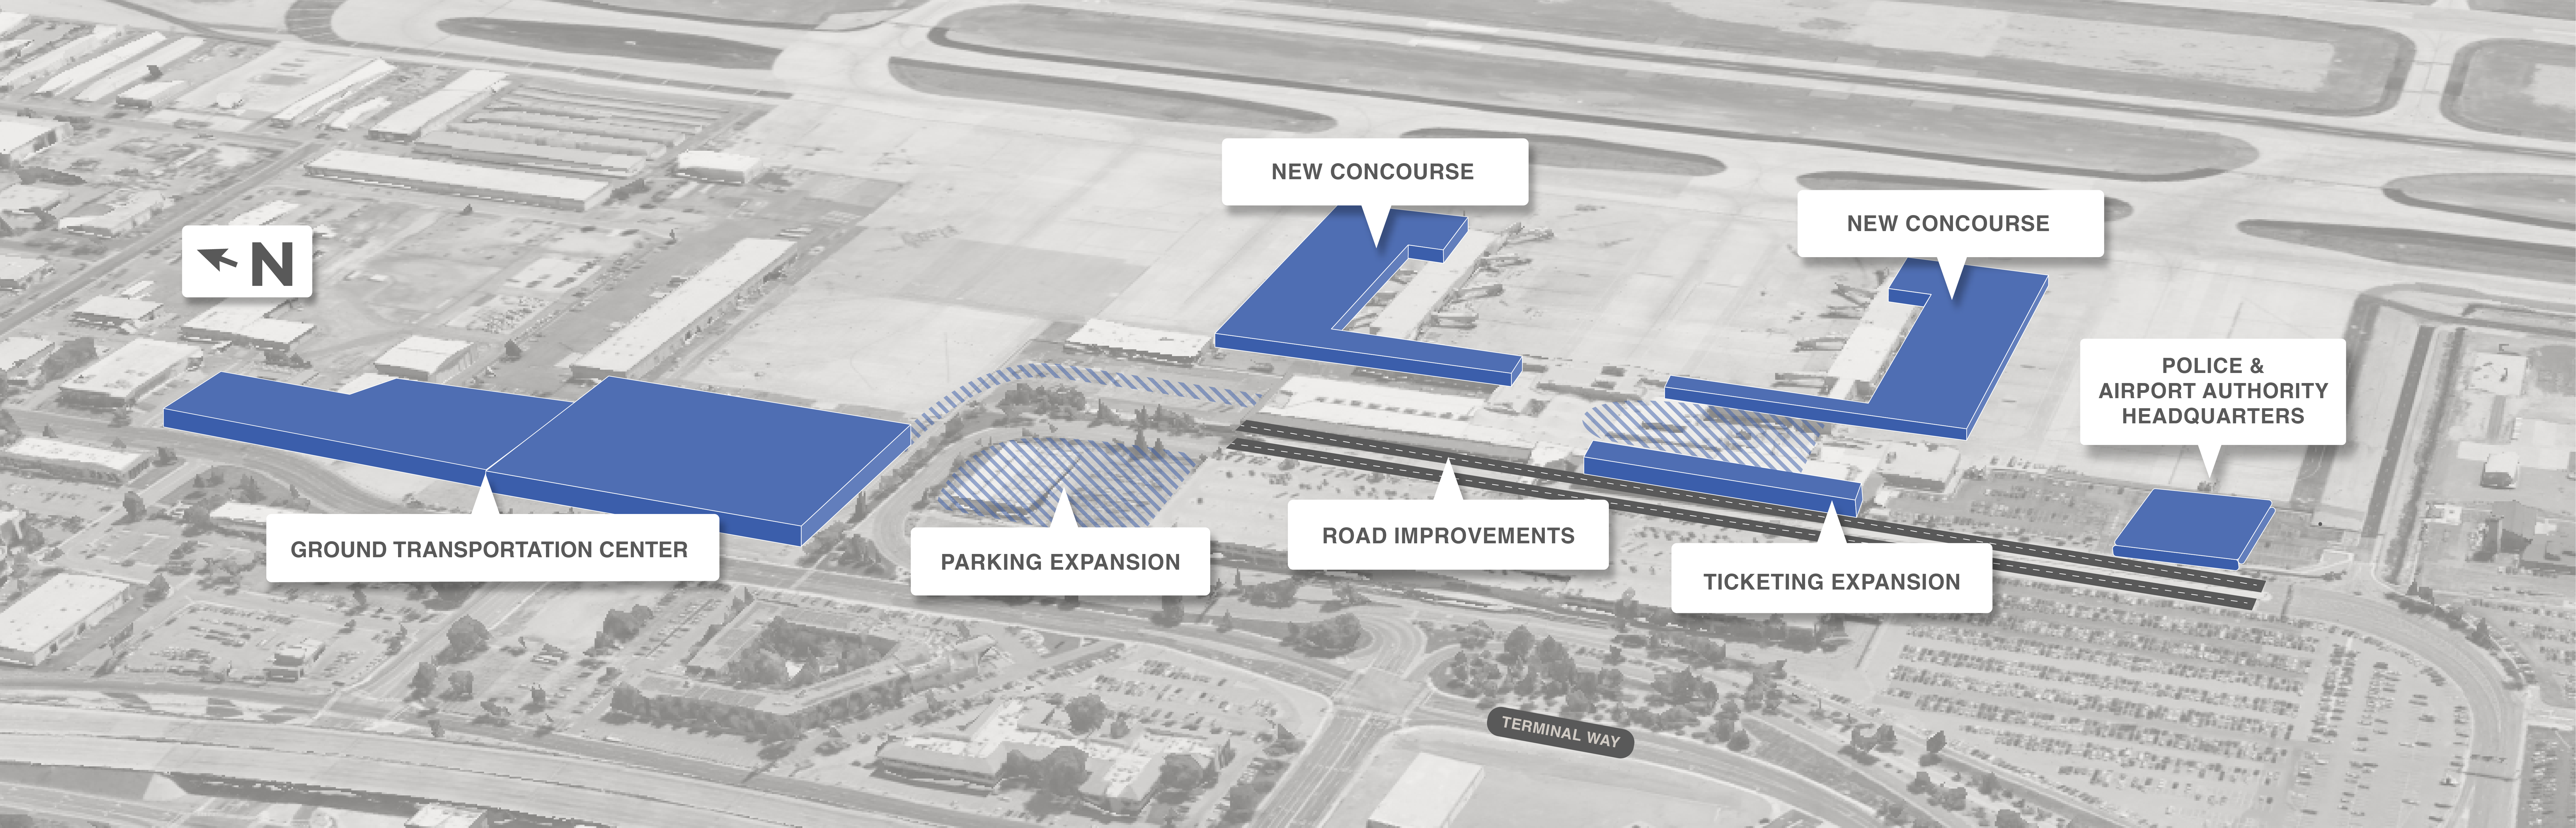 Aerial map of airport with seven areas annotated for construction projects.